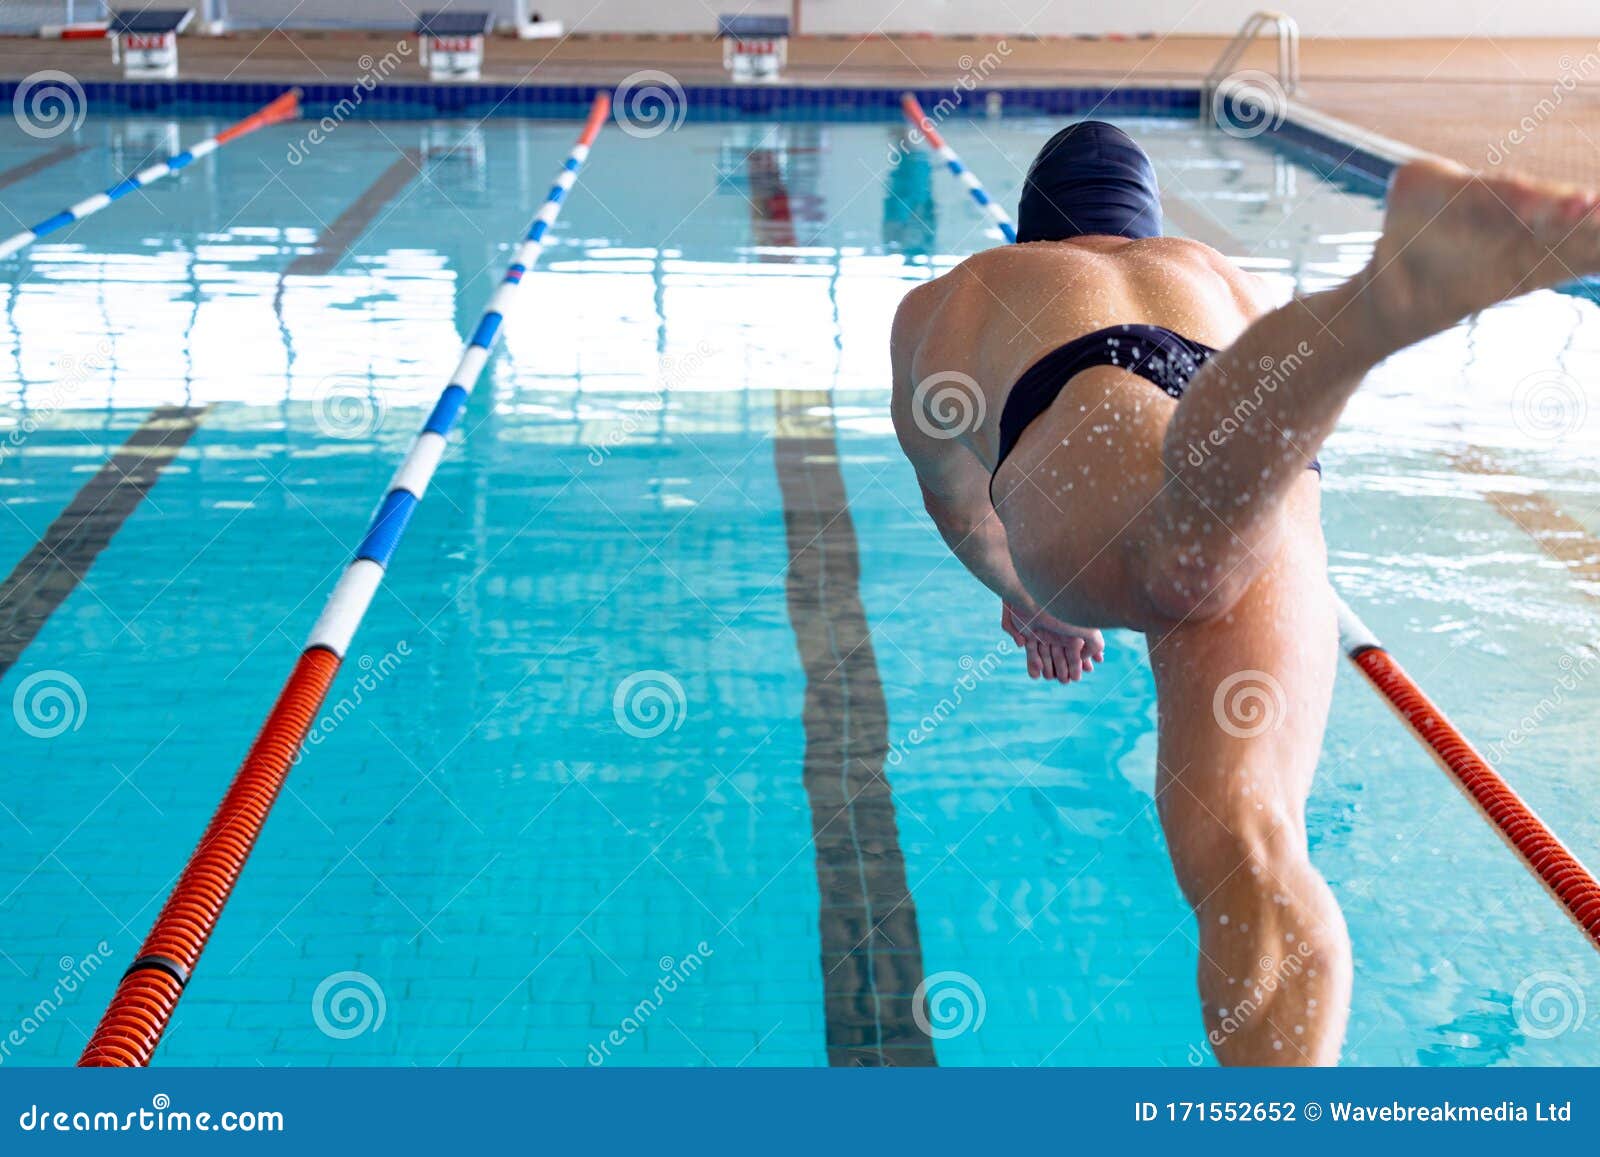 swimmer plunging in the pool